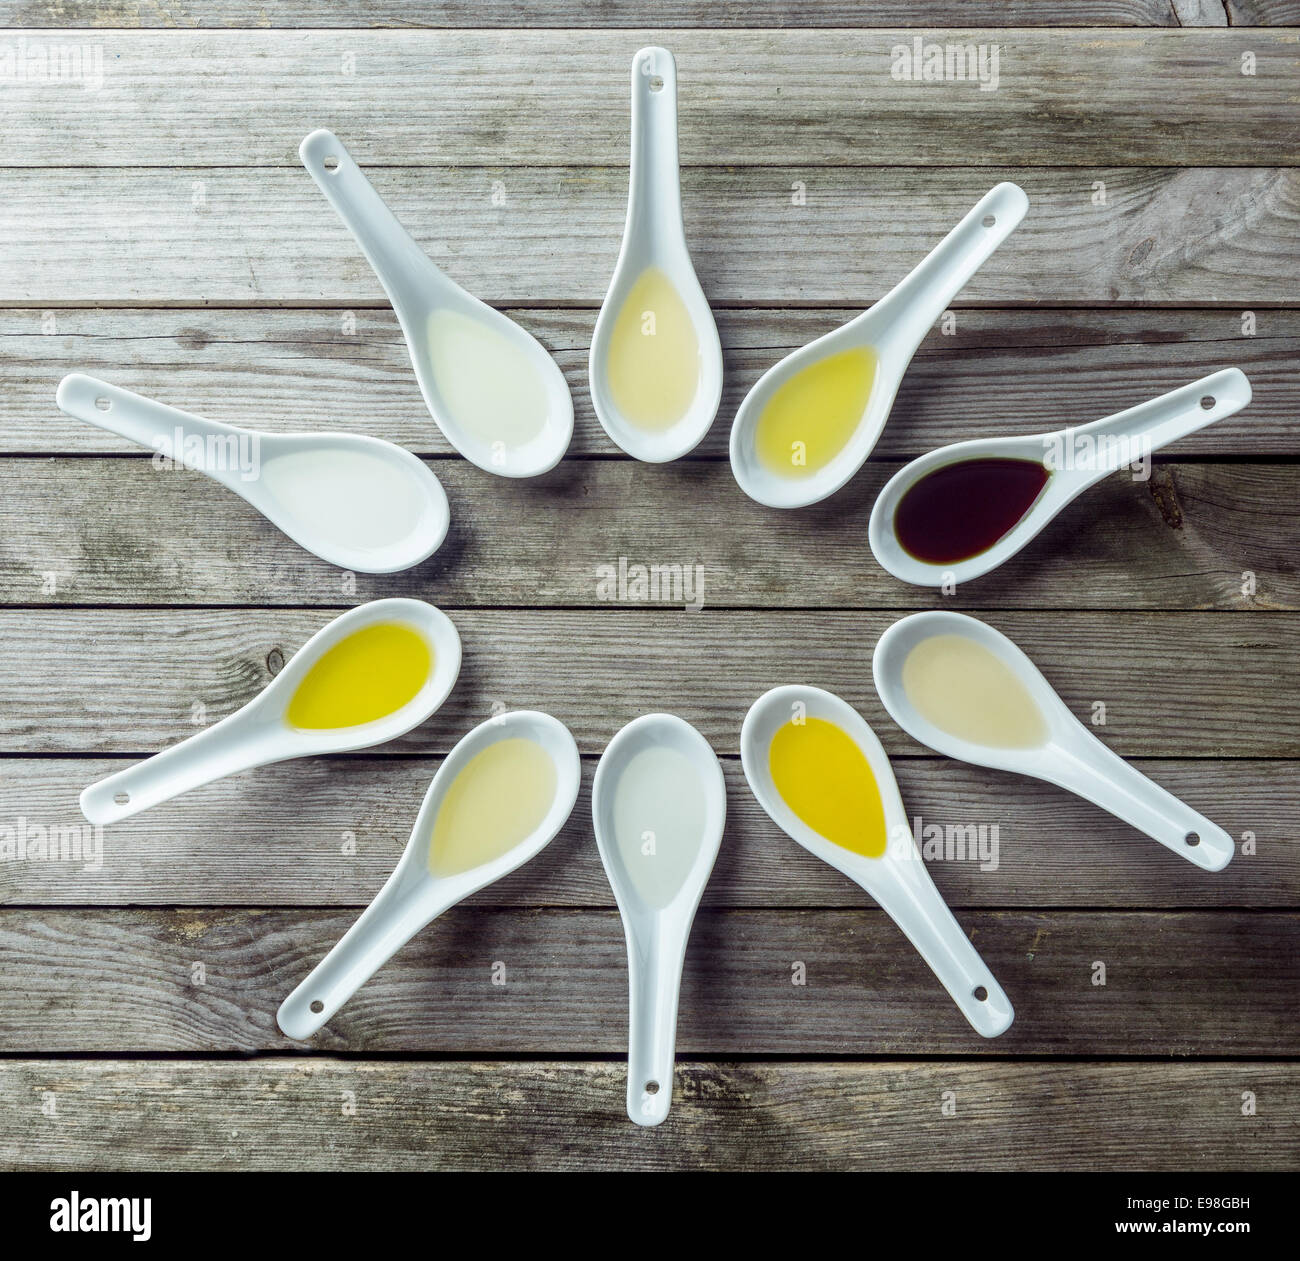 Several Chinese soup spoon filled with different colored liquid on wooden surface Stock Photo